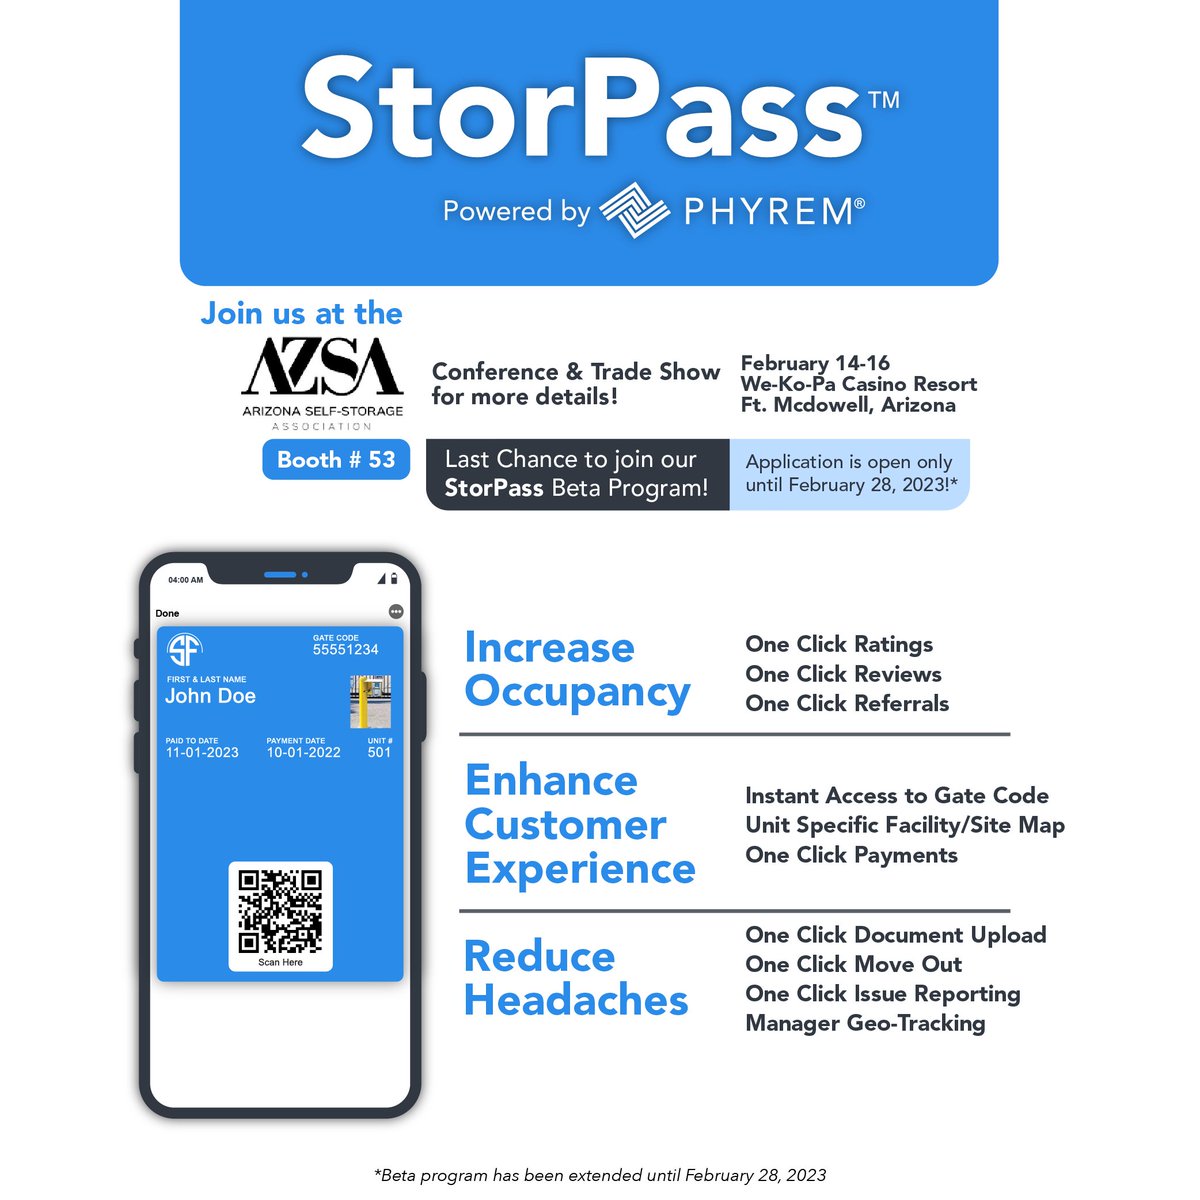 Join us for an amazing time at the #AZSA2023 Tradeshow, Feb 14-16 at We-Ko-Pa Casino Resort. Stop by Booth #53 to witness #StorPass, the ultimate digital access card & #WalletPass solution. Be a part of the self-storage revolution. Book now! phyl.ink/T6lOncGp